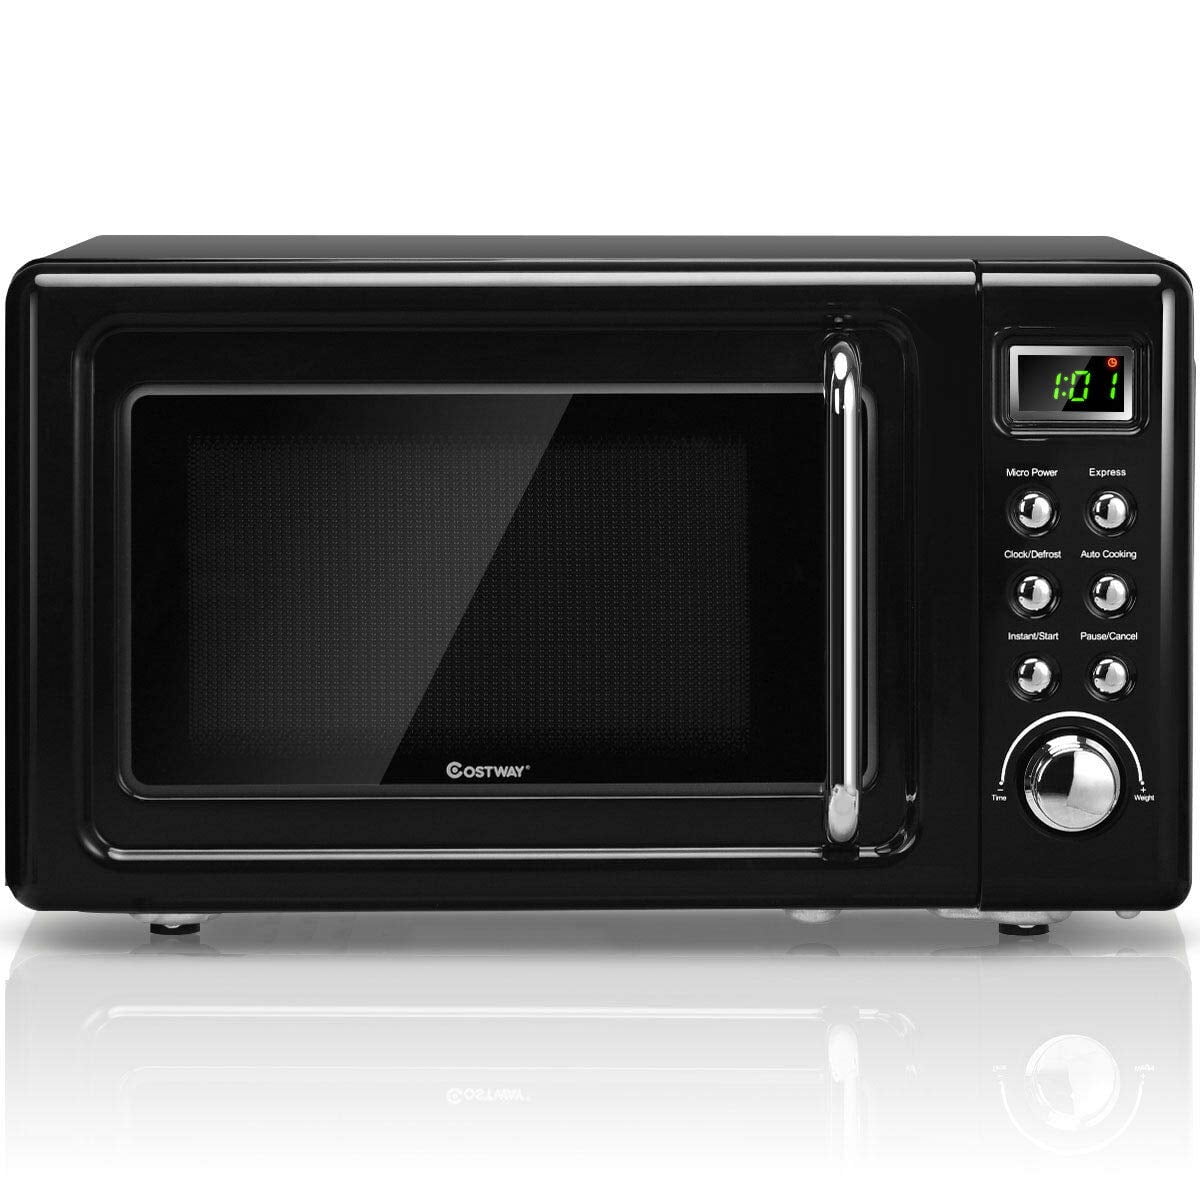 Costway 0.7Cu.ft Retro Countertop Microwave Oven 700W Display Glass Turntable 